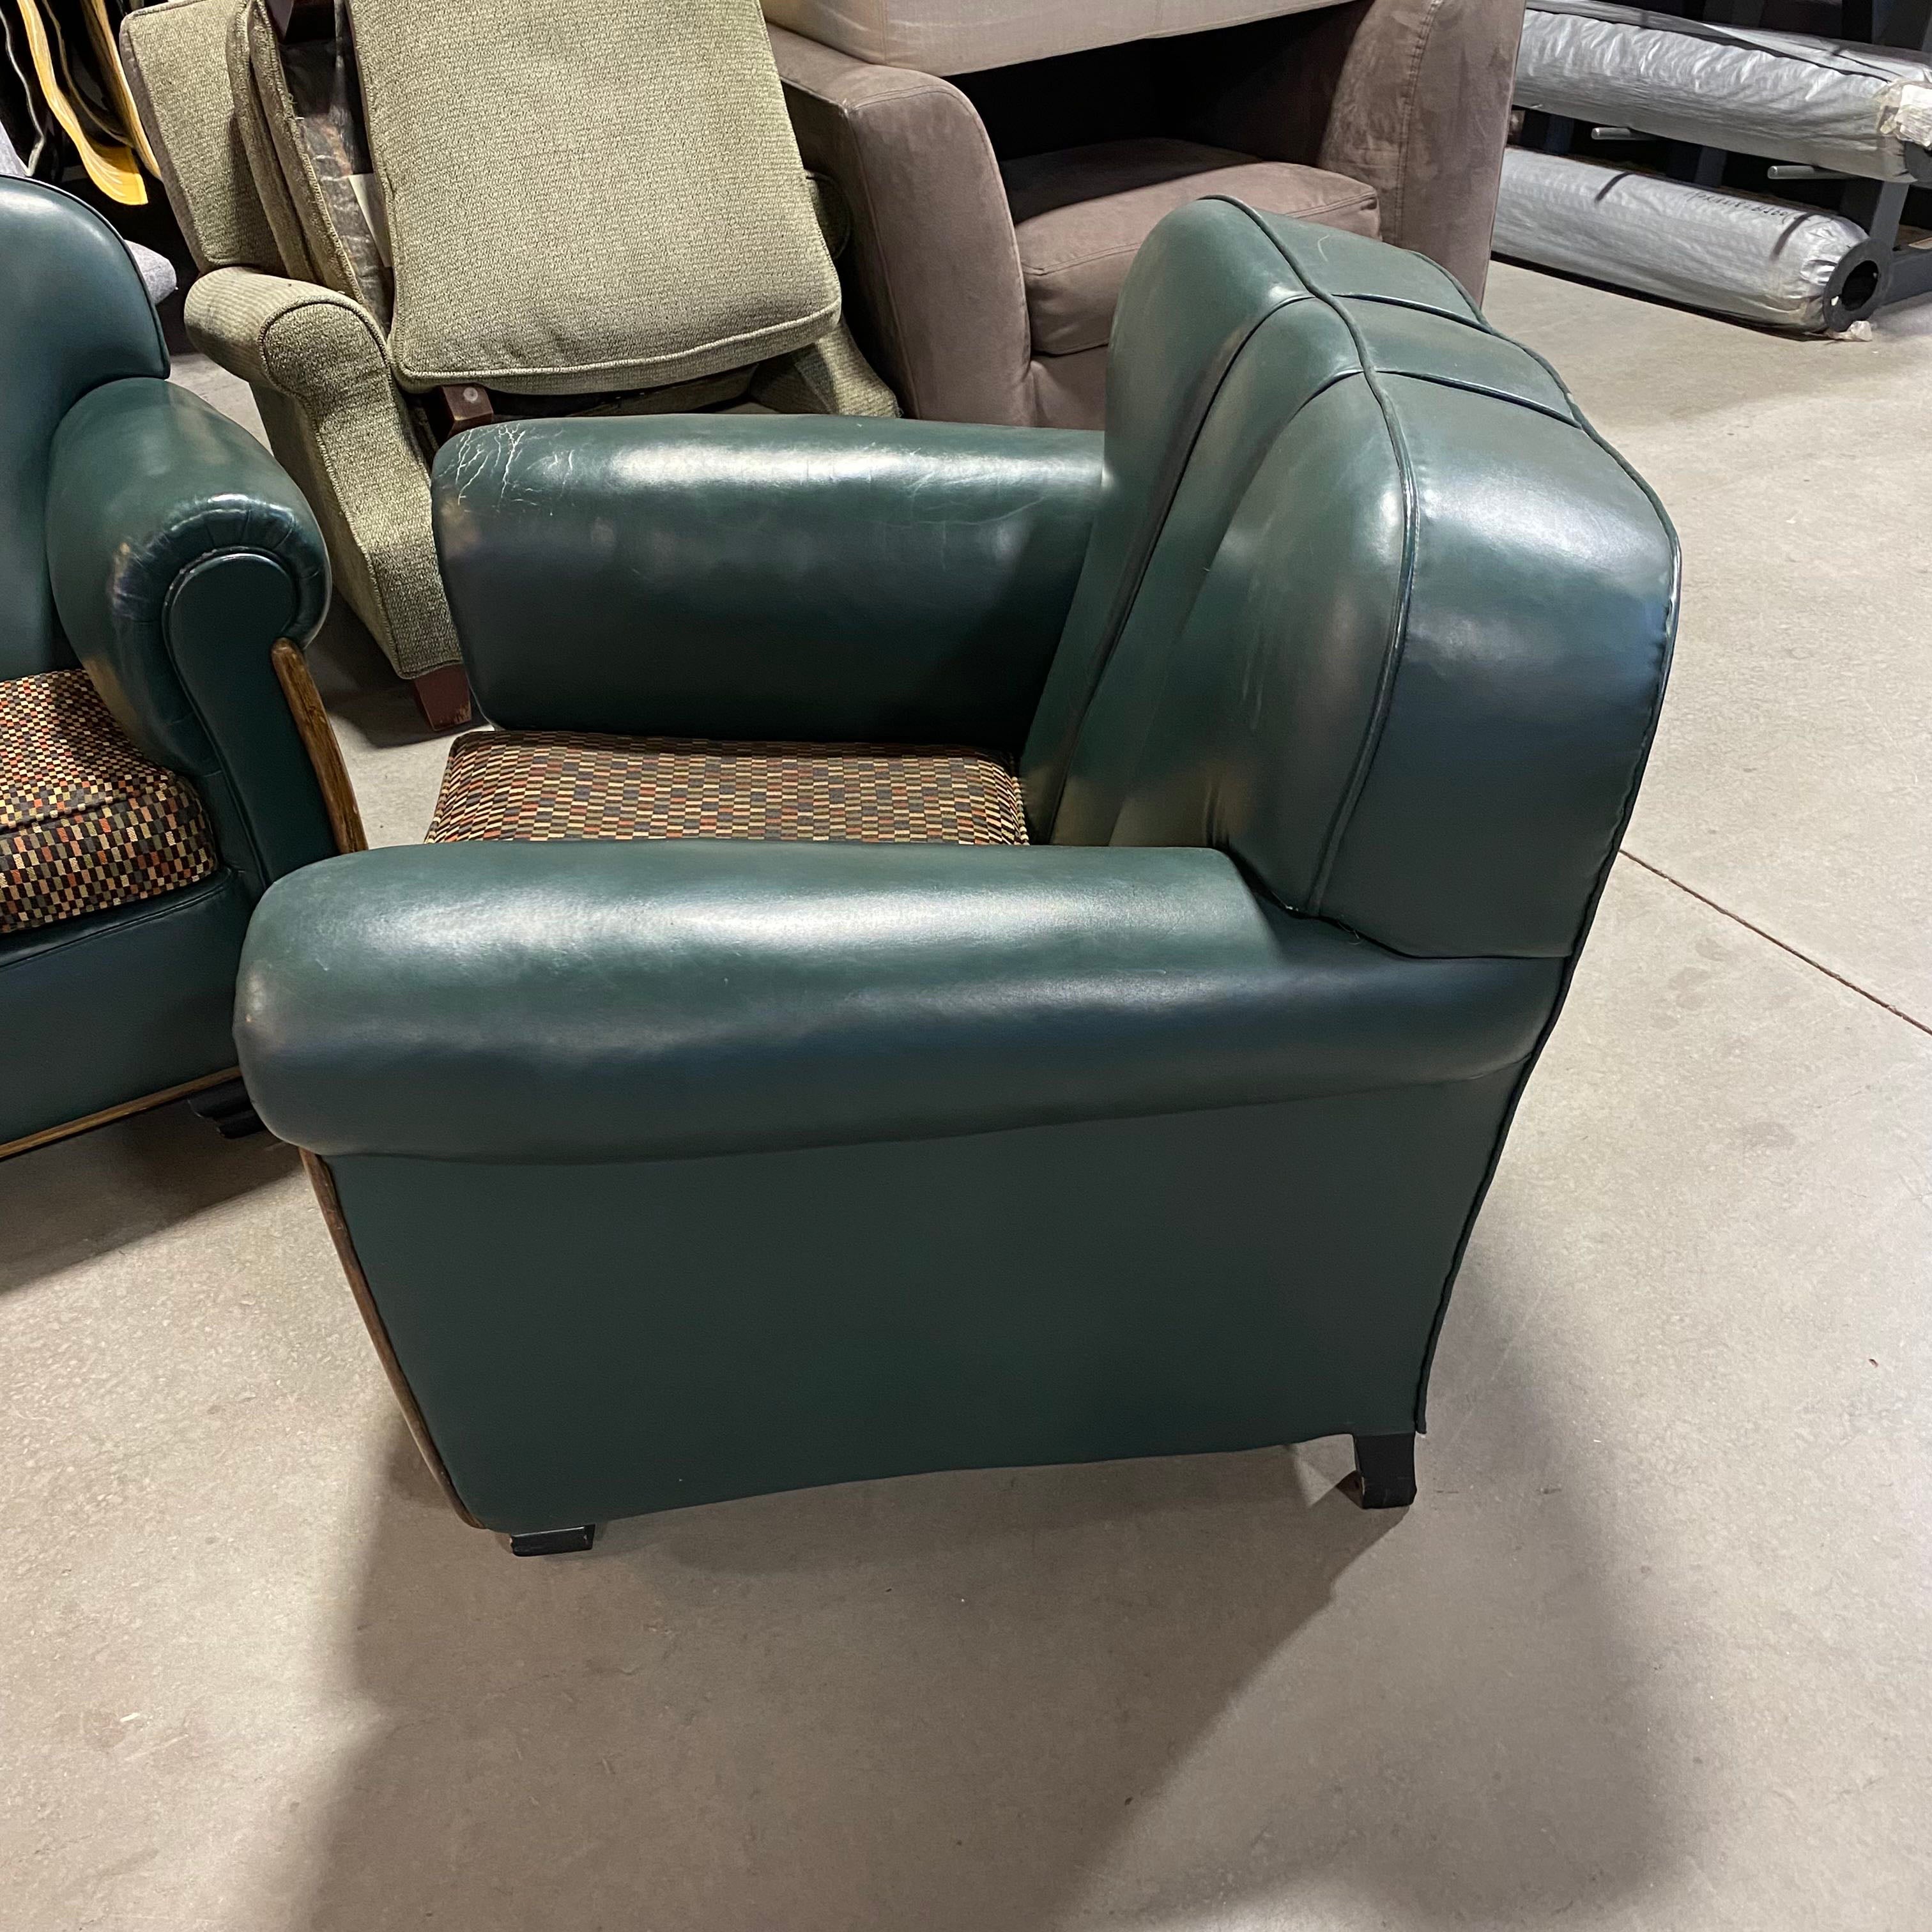 Green Faux Leather Upholstered Seat Wood Trim Club Chair